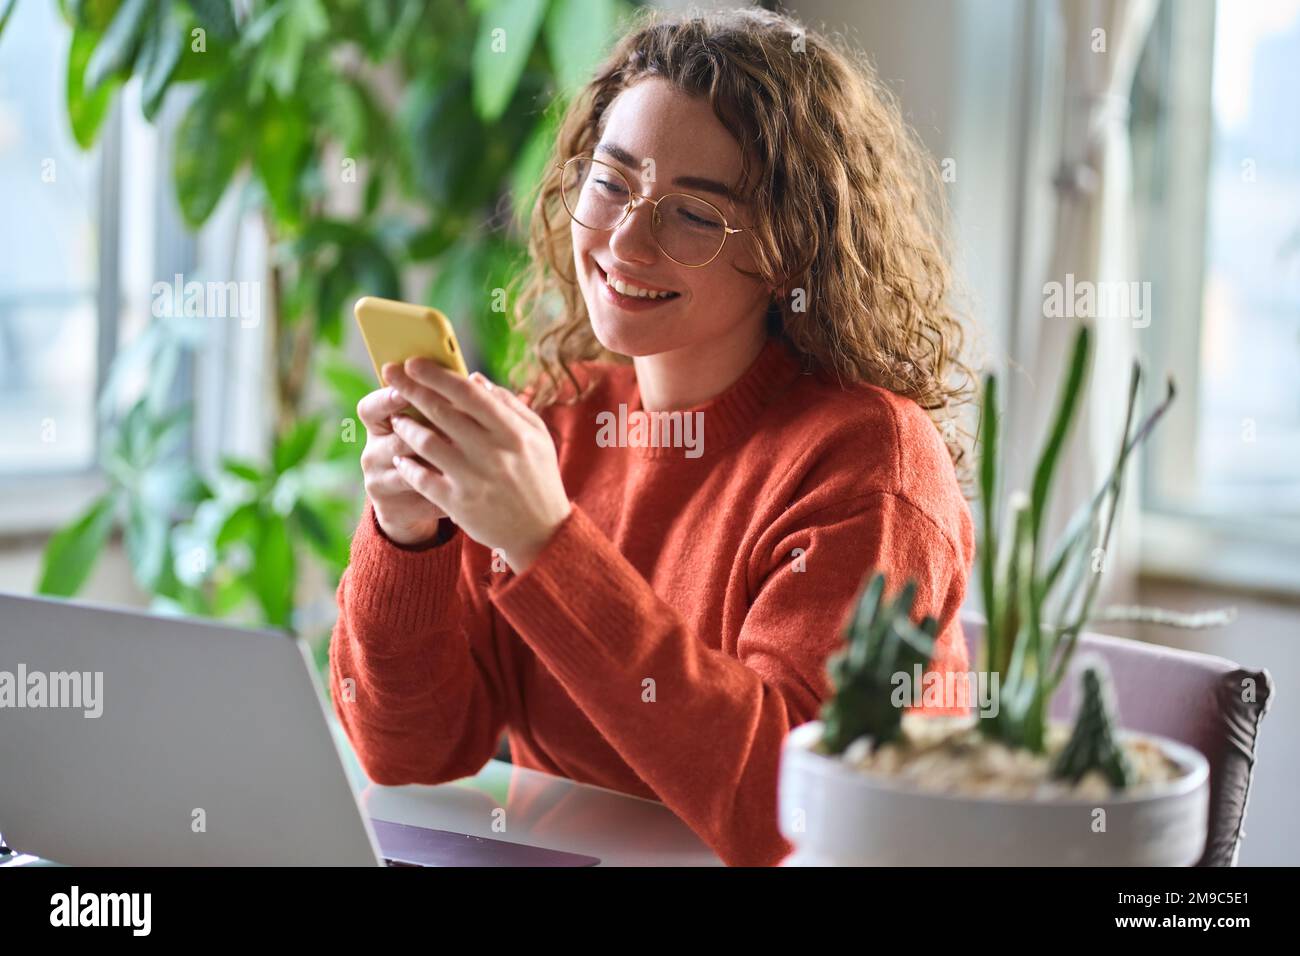 Young happy pretty woman sitting at table holding smartphone using cellphone. Stock Photo